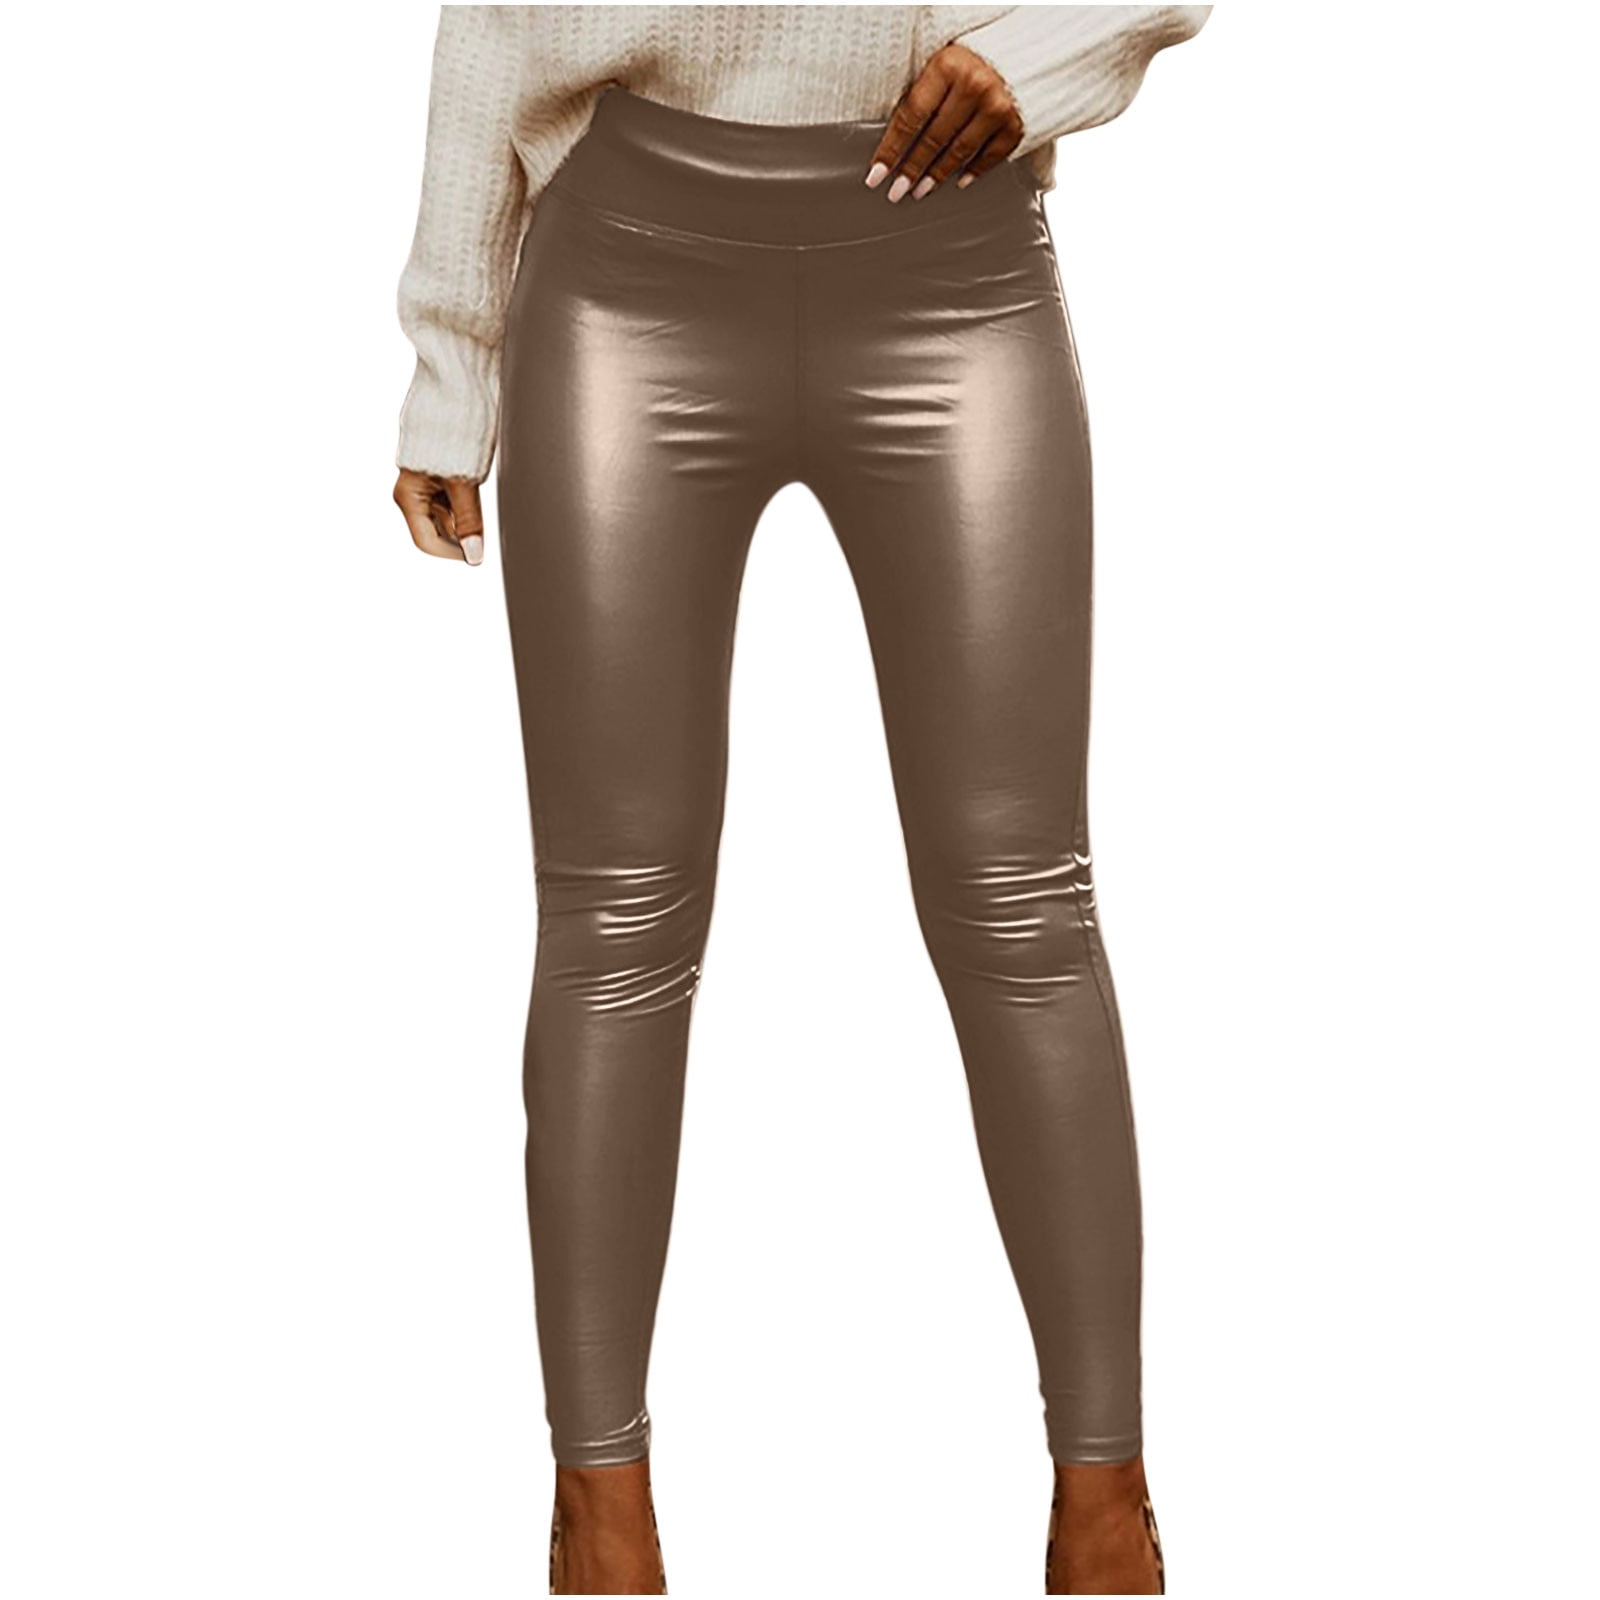 Tuopuda Leather Leggings Women's Black Leggings Leather Look High Waist  Leather Trousers Sexy Tights Winter Hip Trousers Thermal Leggings Hot Pants